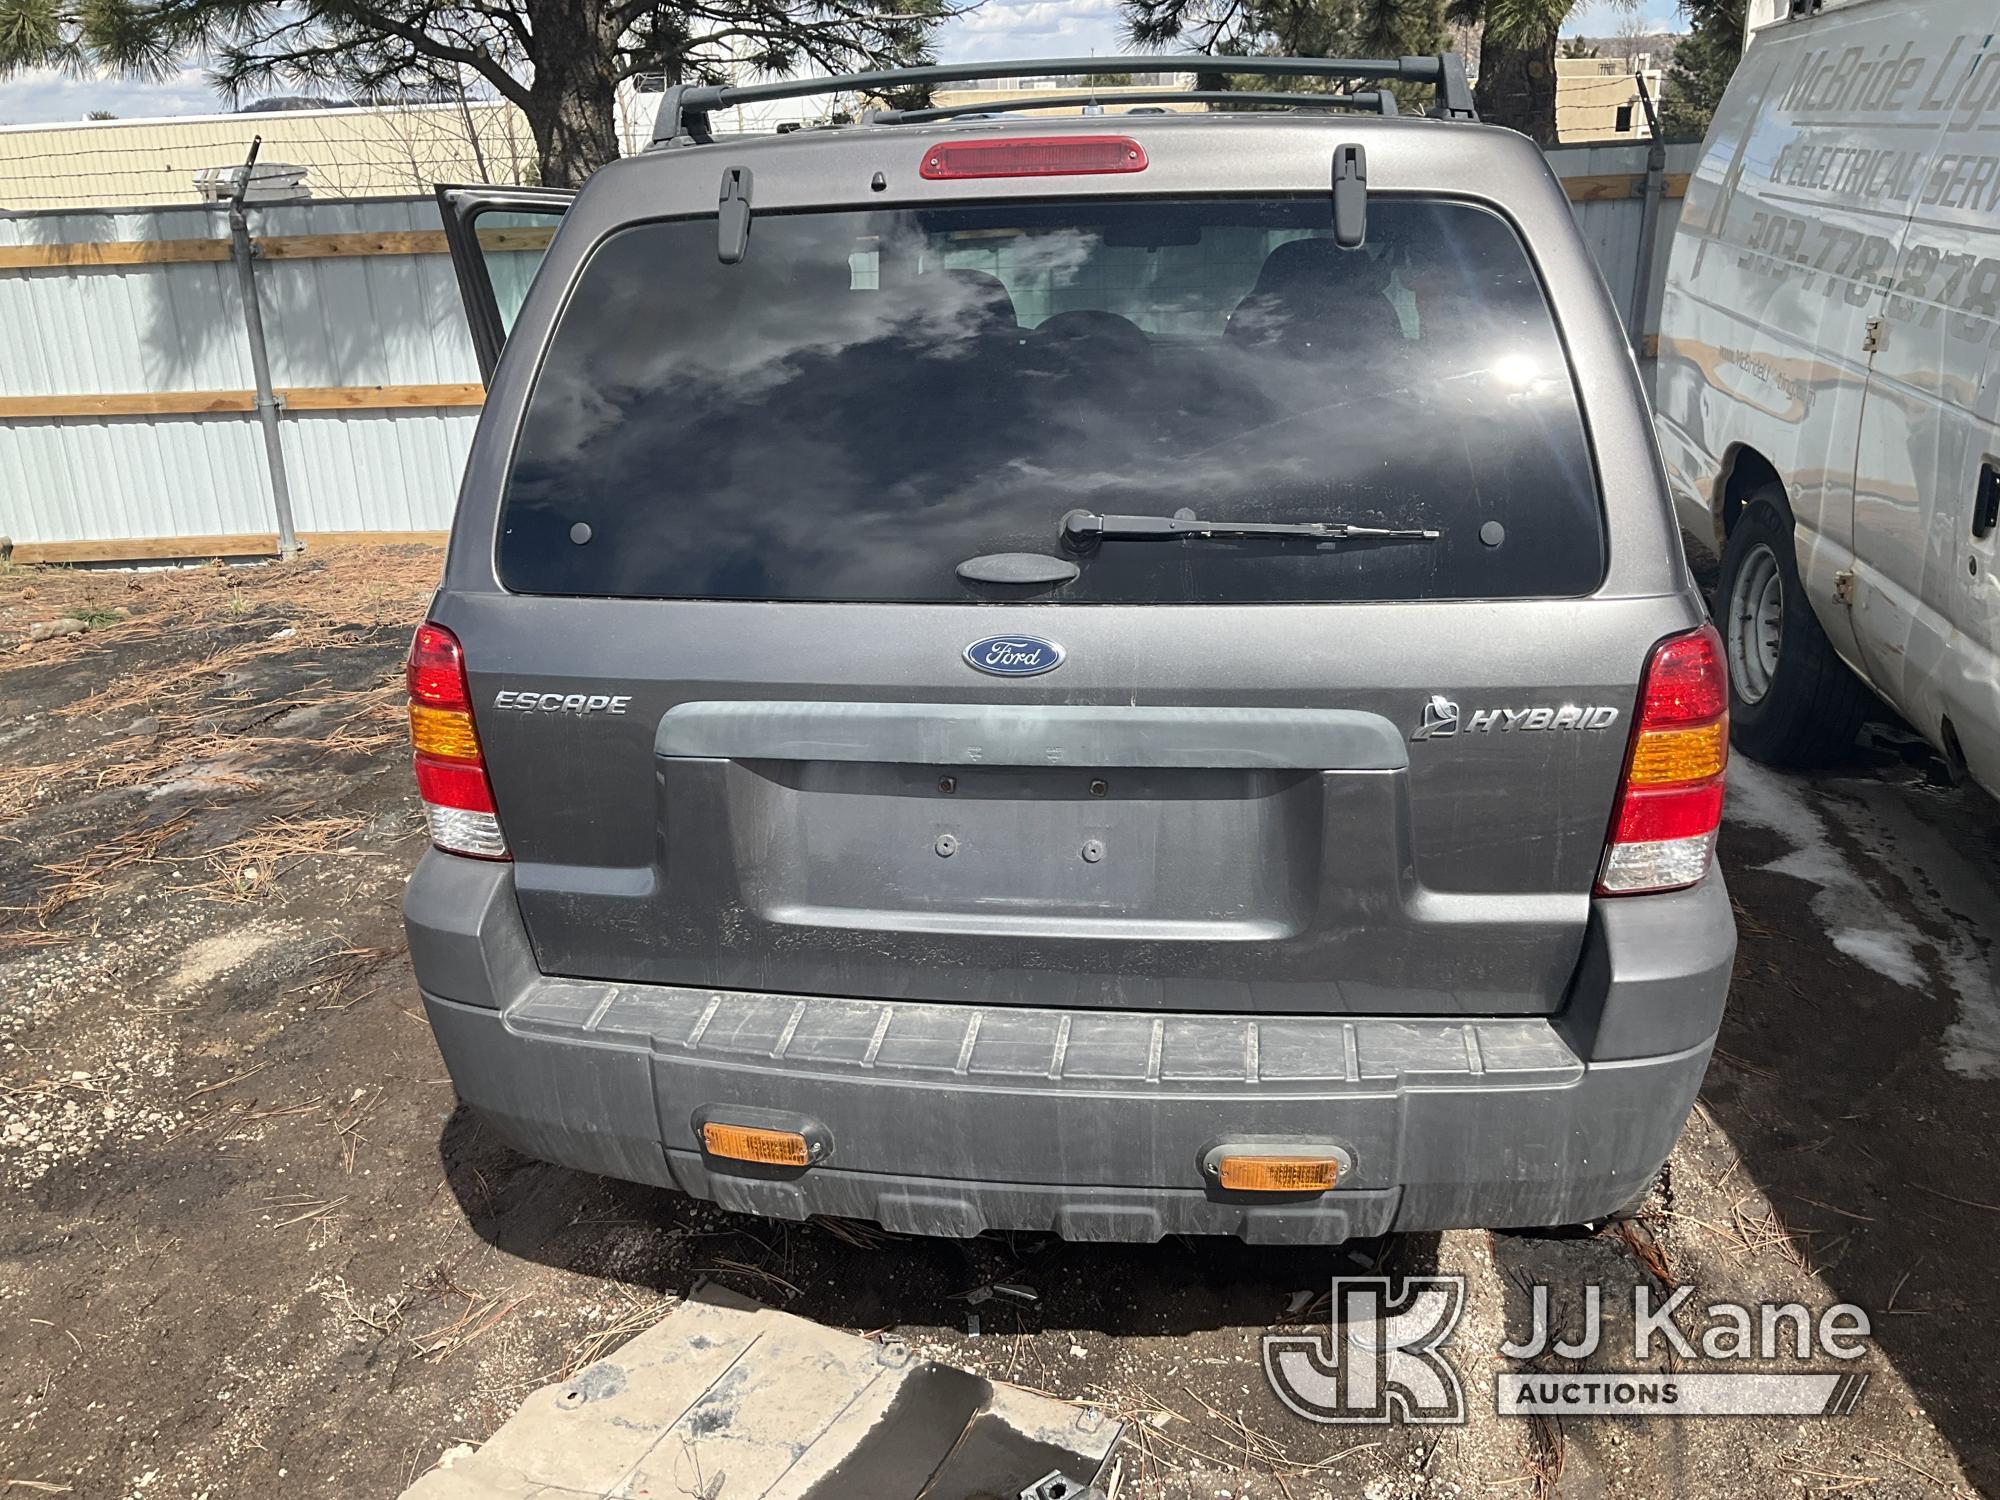 (Castle Rock, CO) 2005 Ford Escape Hybrid 4-Door Sport Utility Vehicle Runs,moves,operates.  Jump to